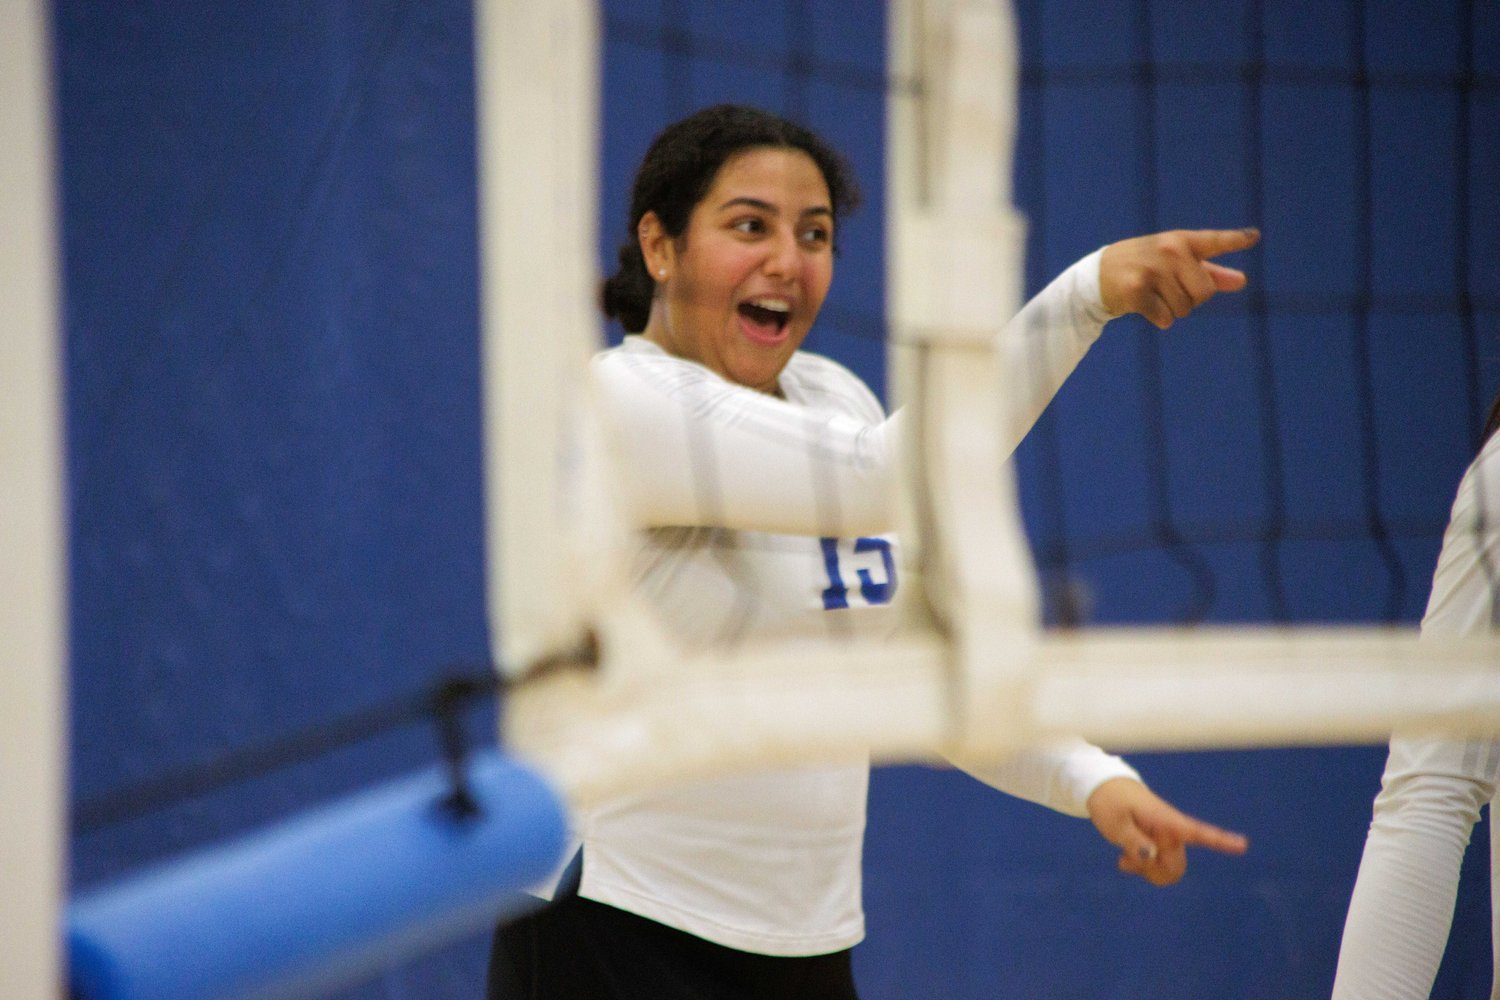  Setter Jaylynn Fierro, number 15, points at one of her teammates during a match between the Santa Monica College (SMC) and San Diego Miramar Women's Volleyball team at the SMC gymnasium, Santa Monica, Calif. on Sept. 08, 2023. (Danniel Sumarkho | Th